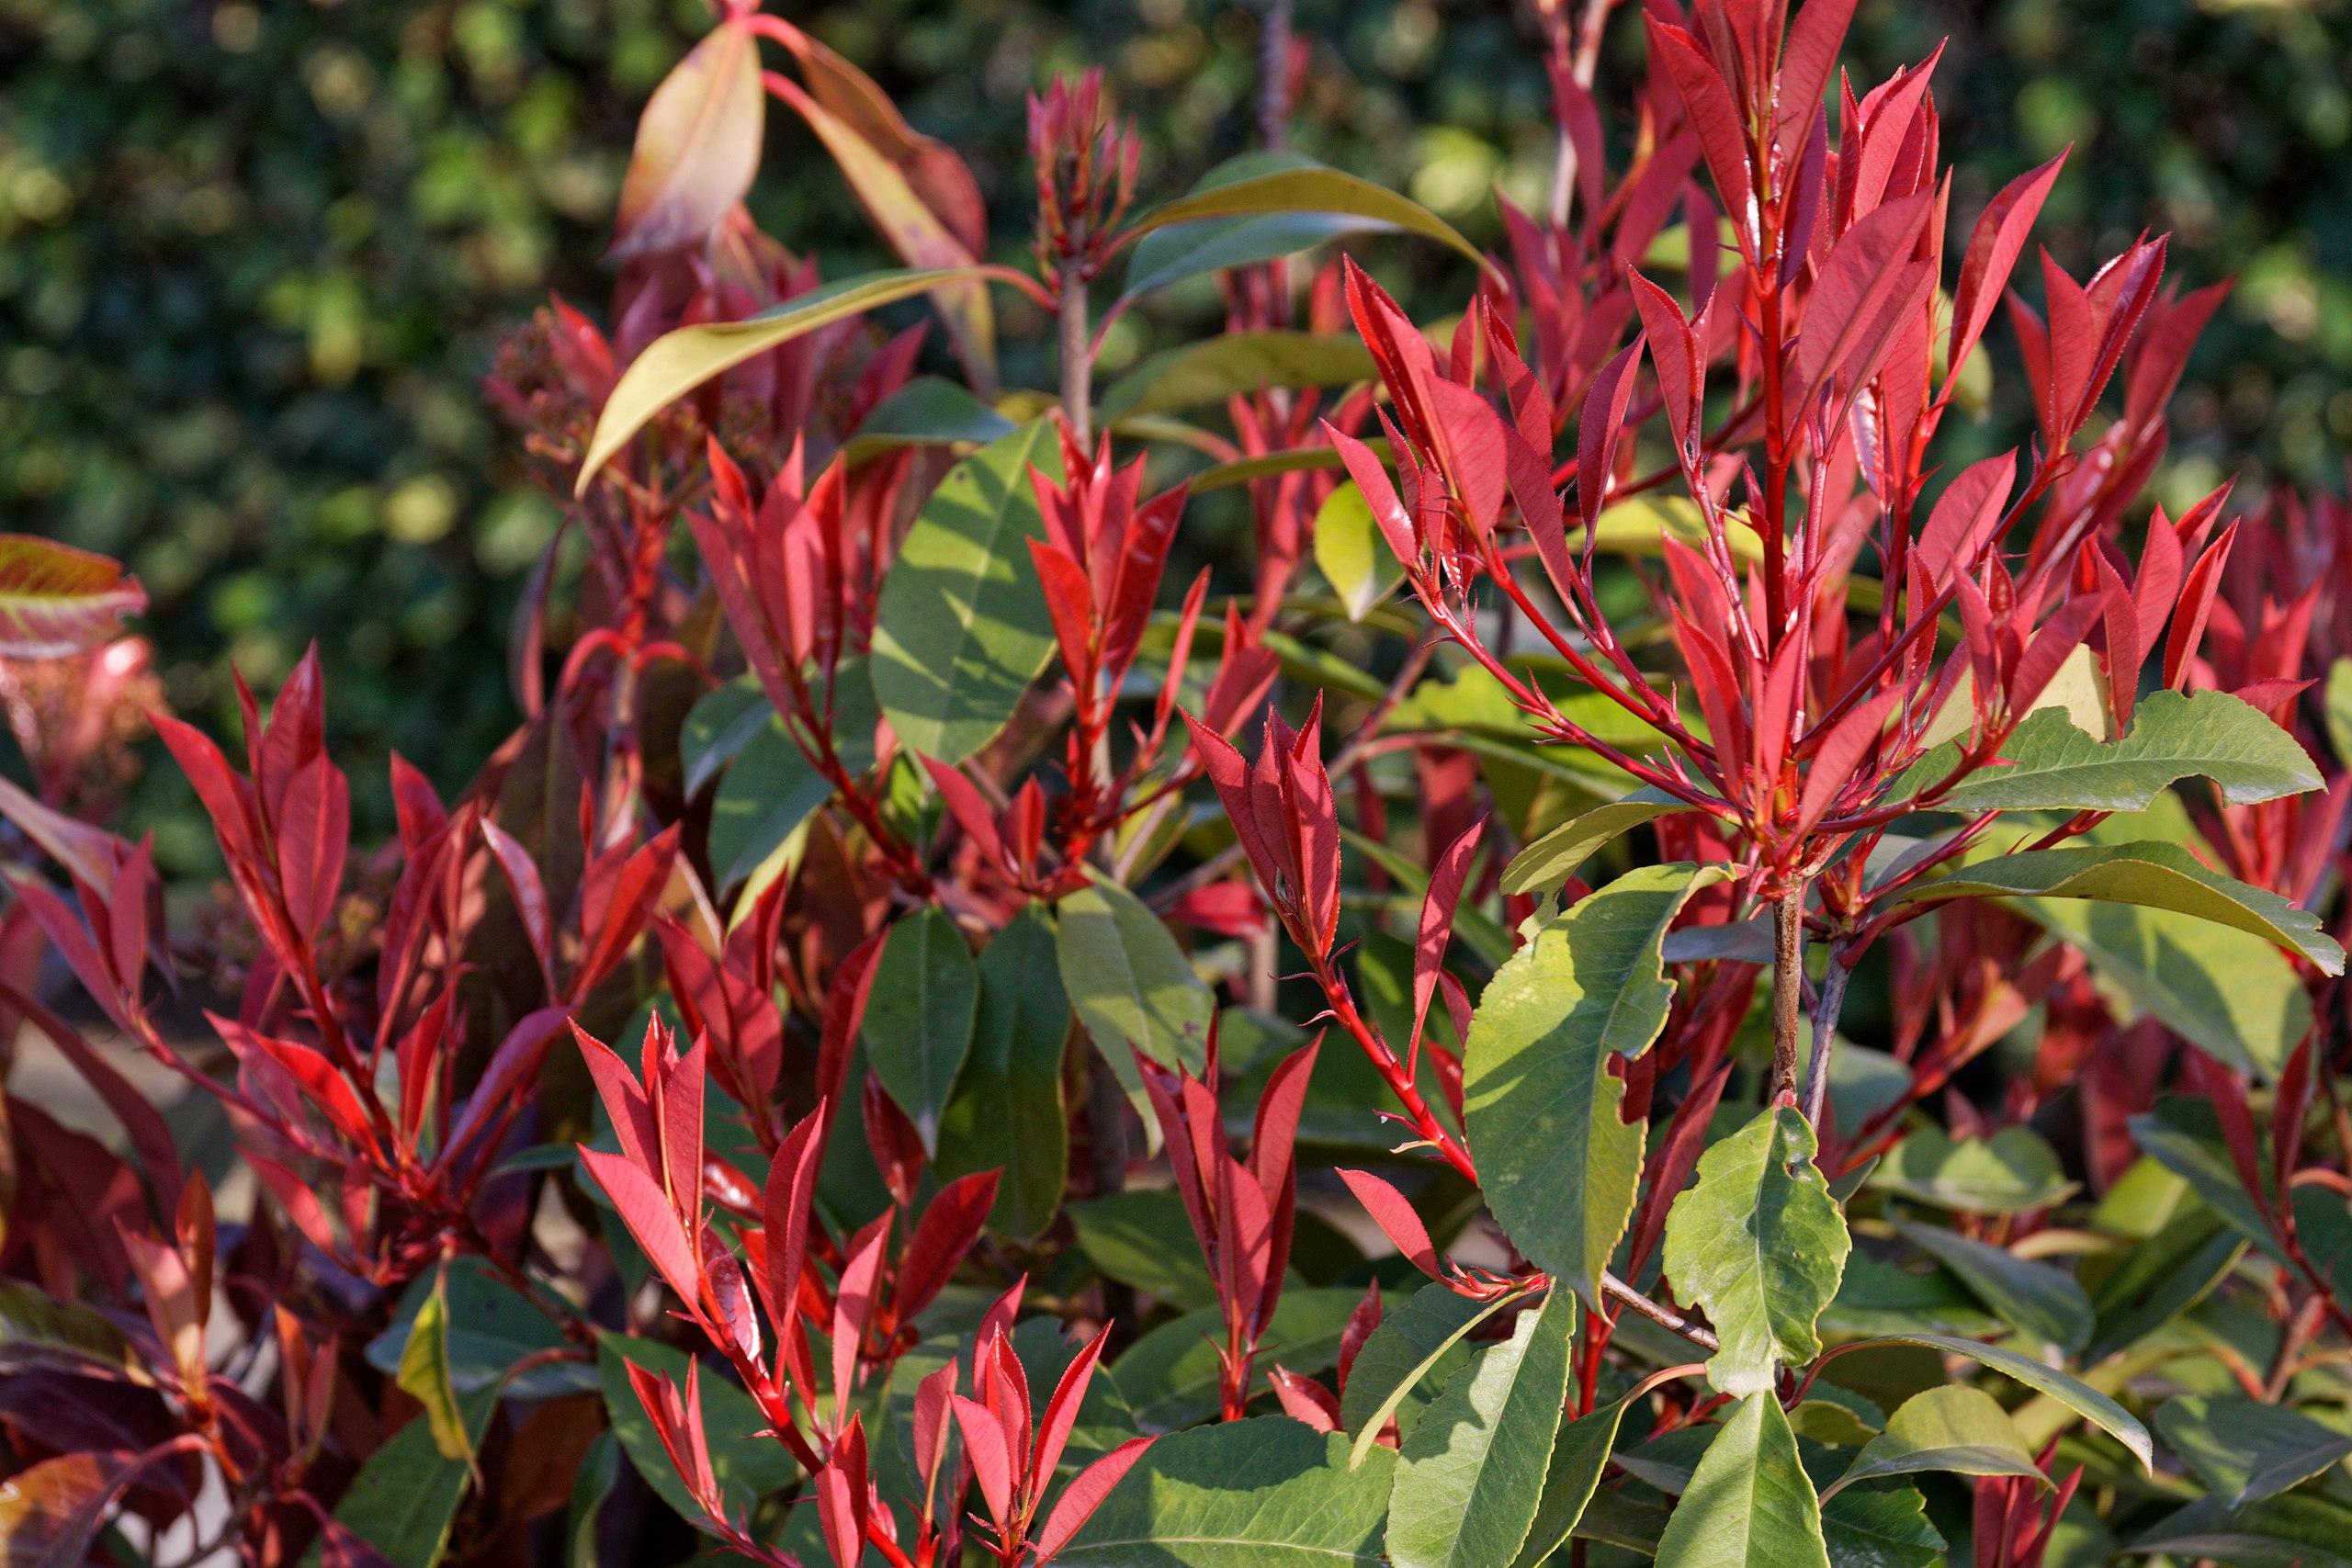 Red leaves with stems.